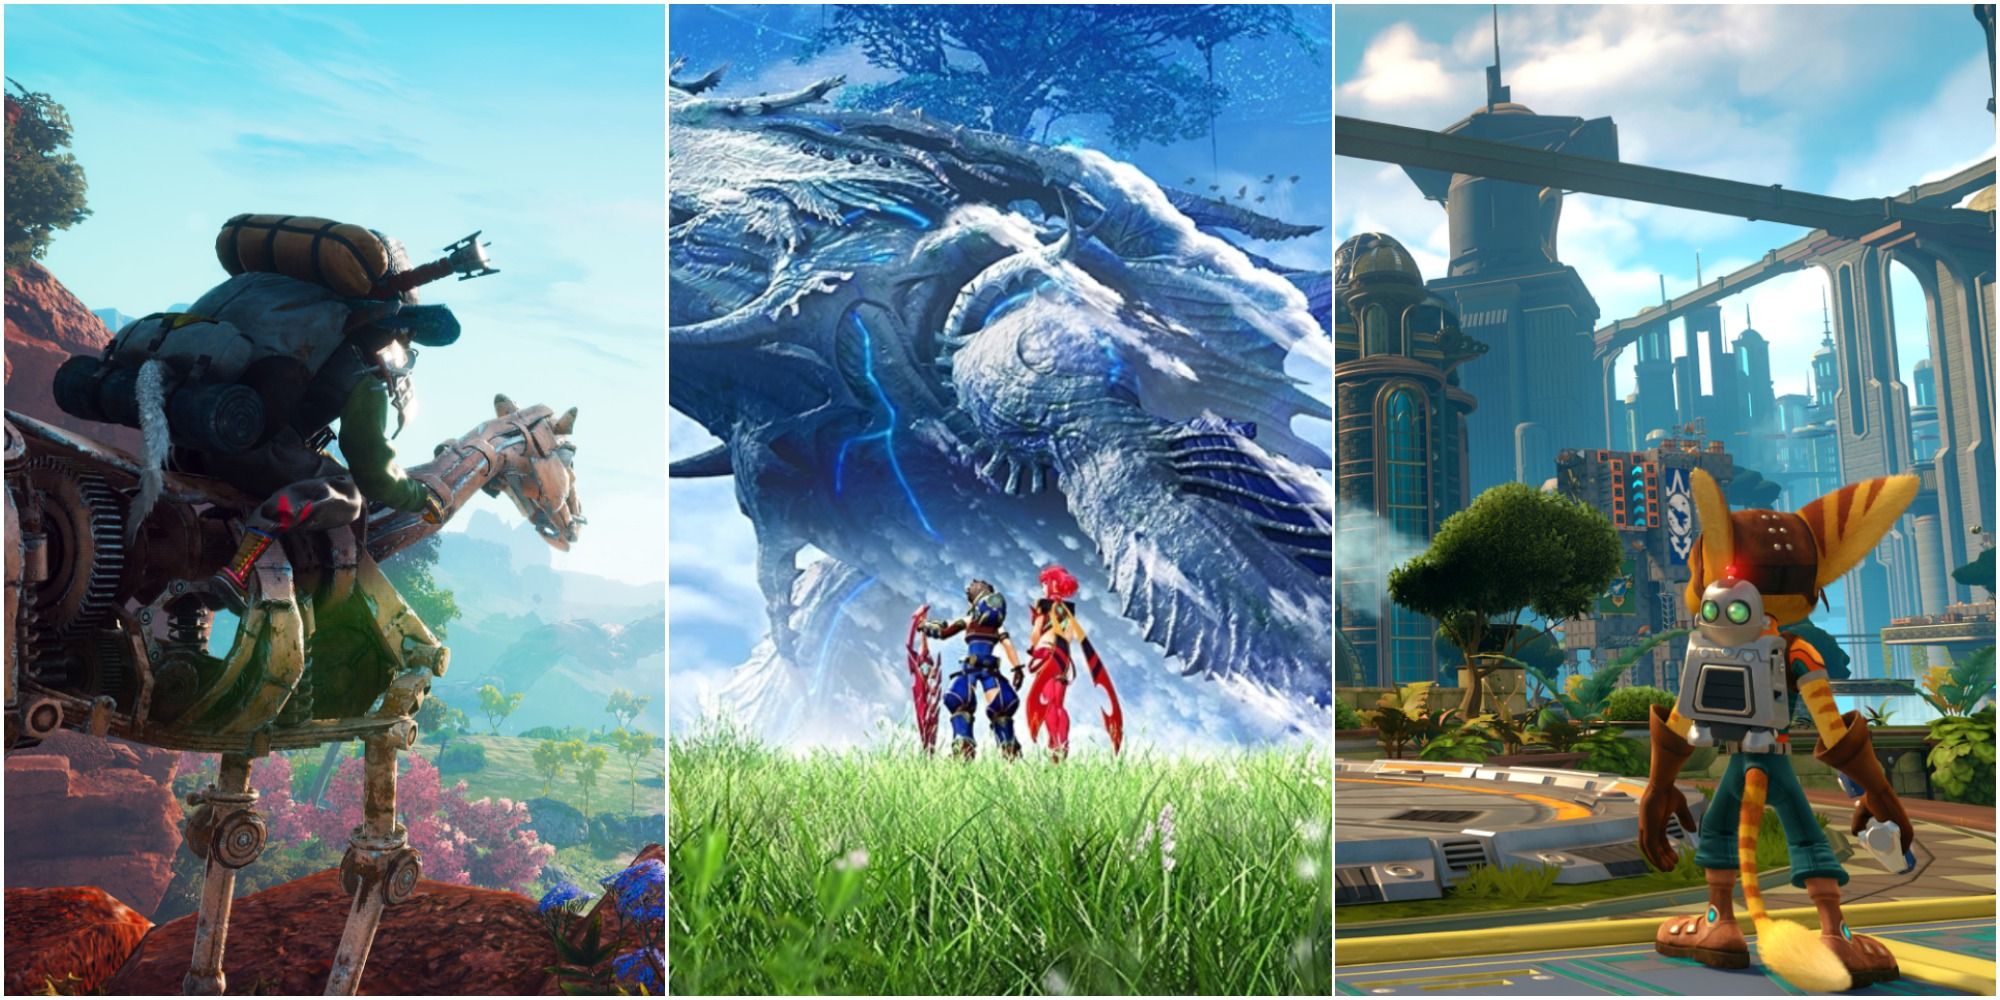 Best Fictional Planets New World from Biomutant on the left, Alrest from Xenoblade Chronicles 2 in the middle and Kerwan from Ratchet & Clank on the right